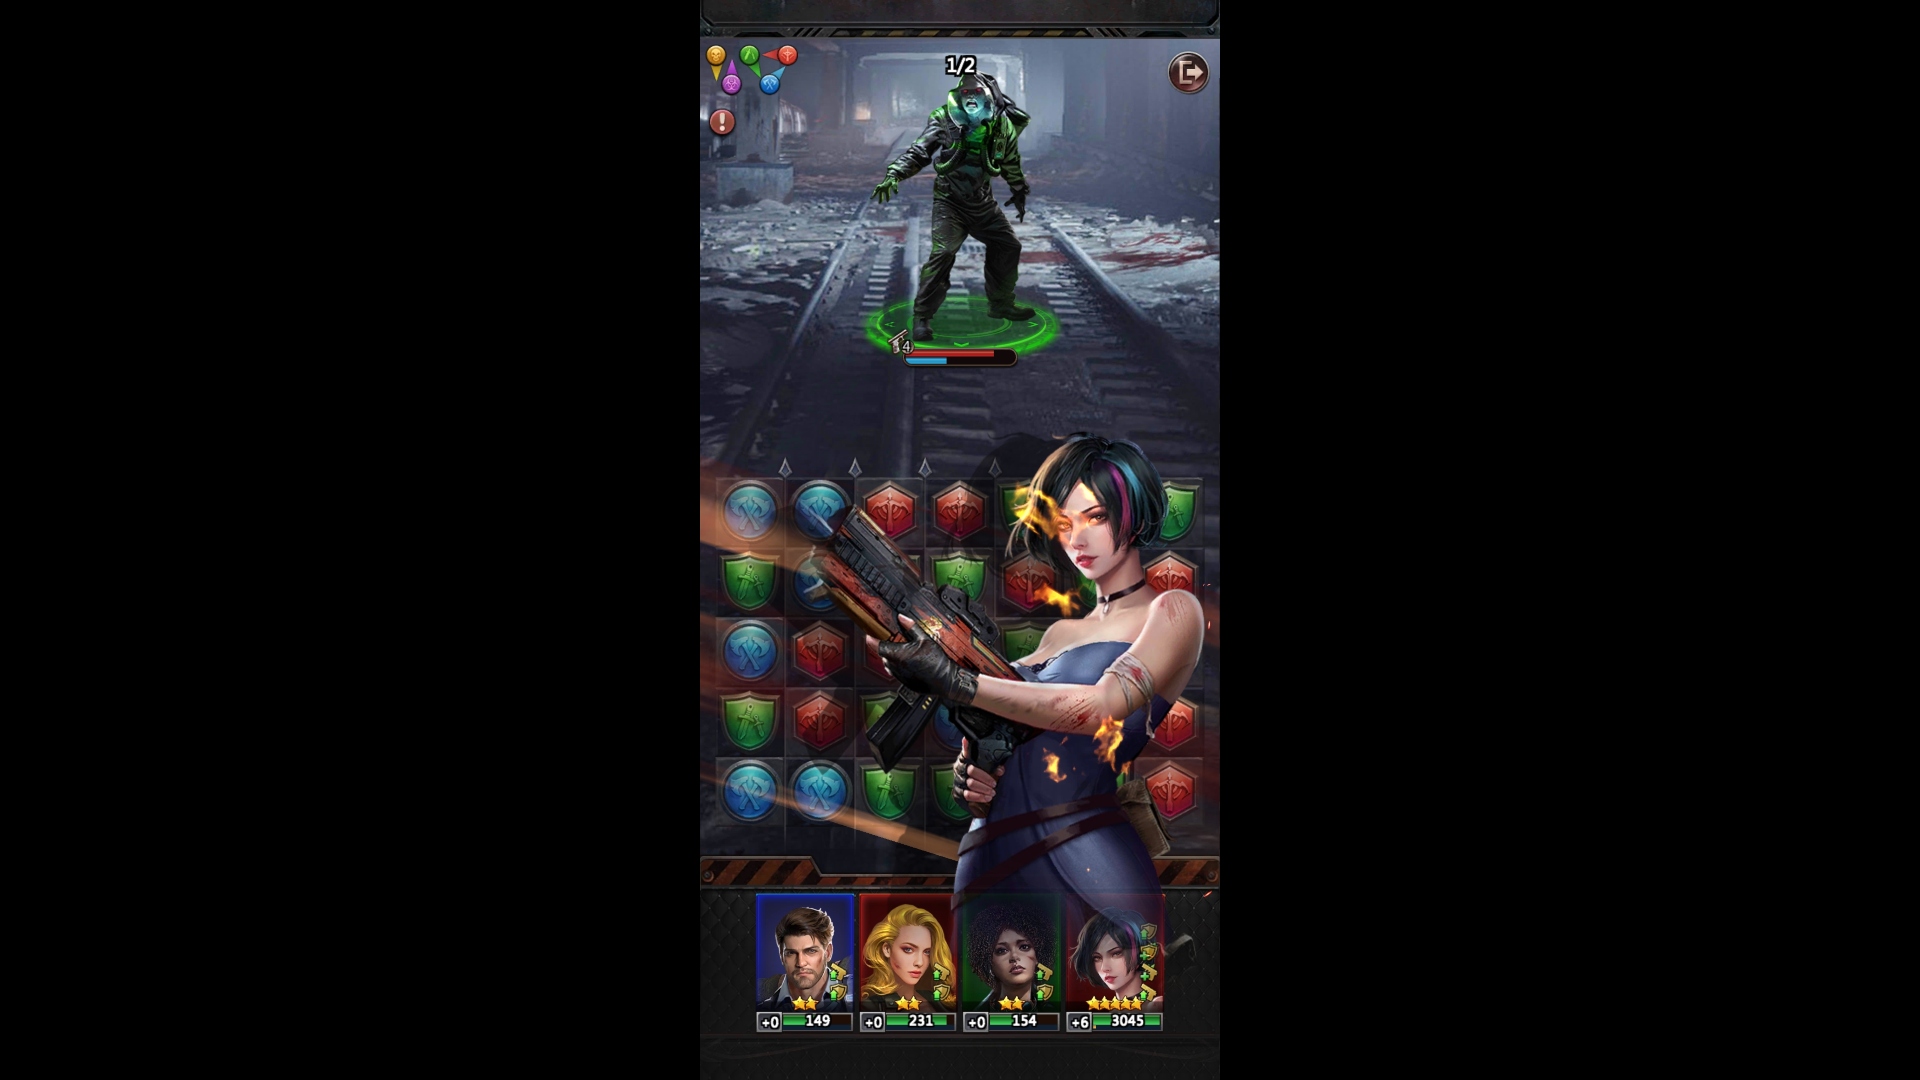 Best mobile games - Puzzles & Survivals. A screenshot shows a character doing a special attack on a zombie, with the tile-based grid is seen underneath her.